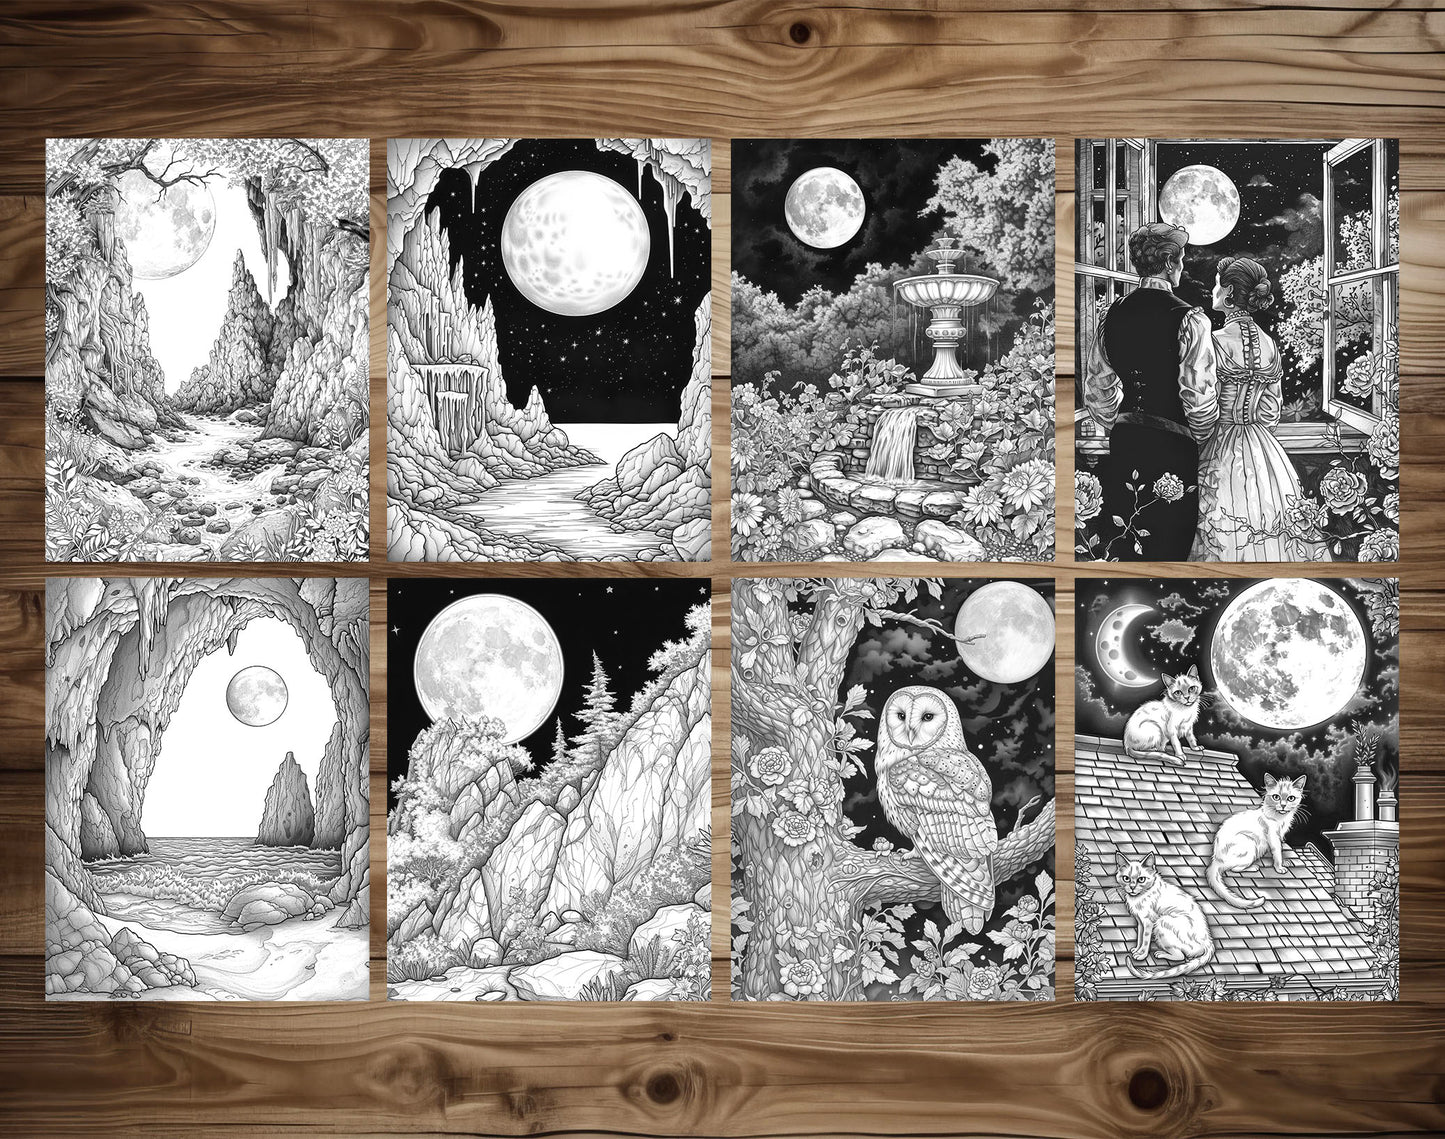 50 Moon Night Grayscale Coloring Pages - Instant Download - Printable Dark/Light